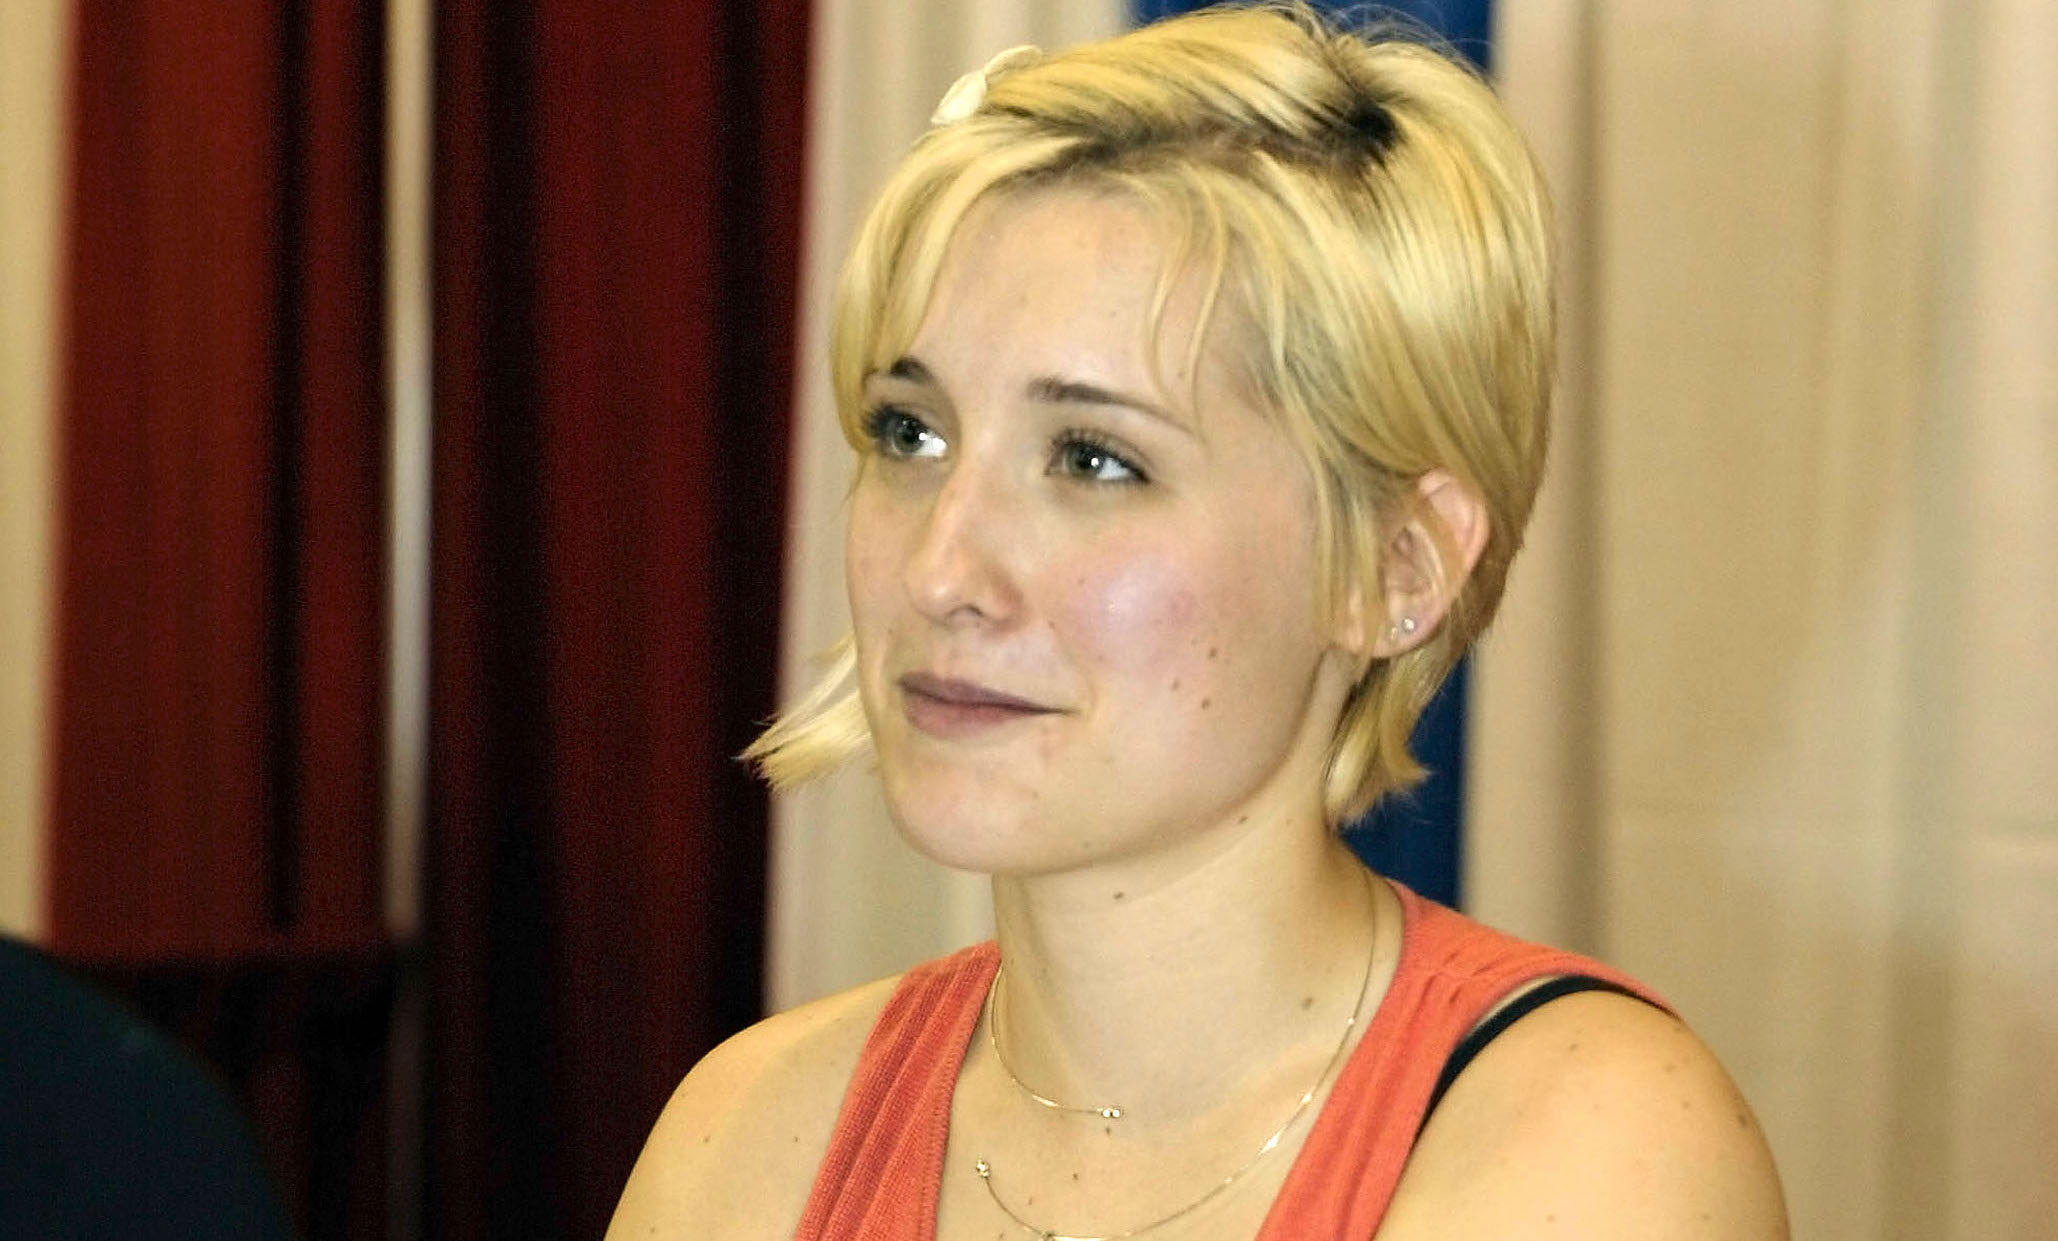 “smallville” Actress Allison Mack Arrested For Role In Alleged Sex Cult Vice News